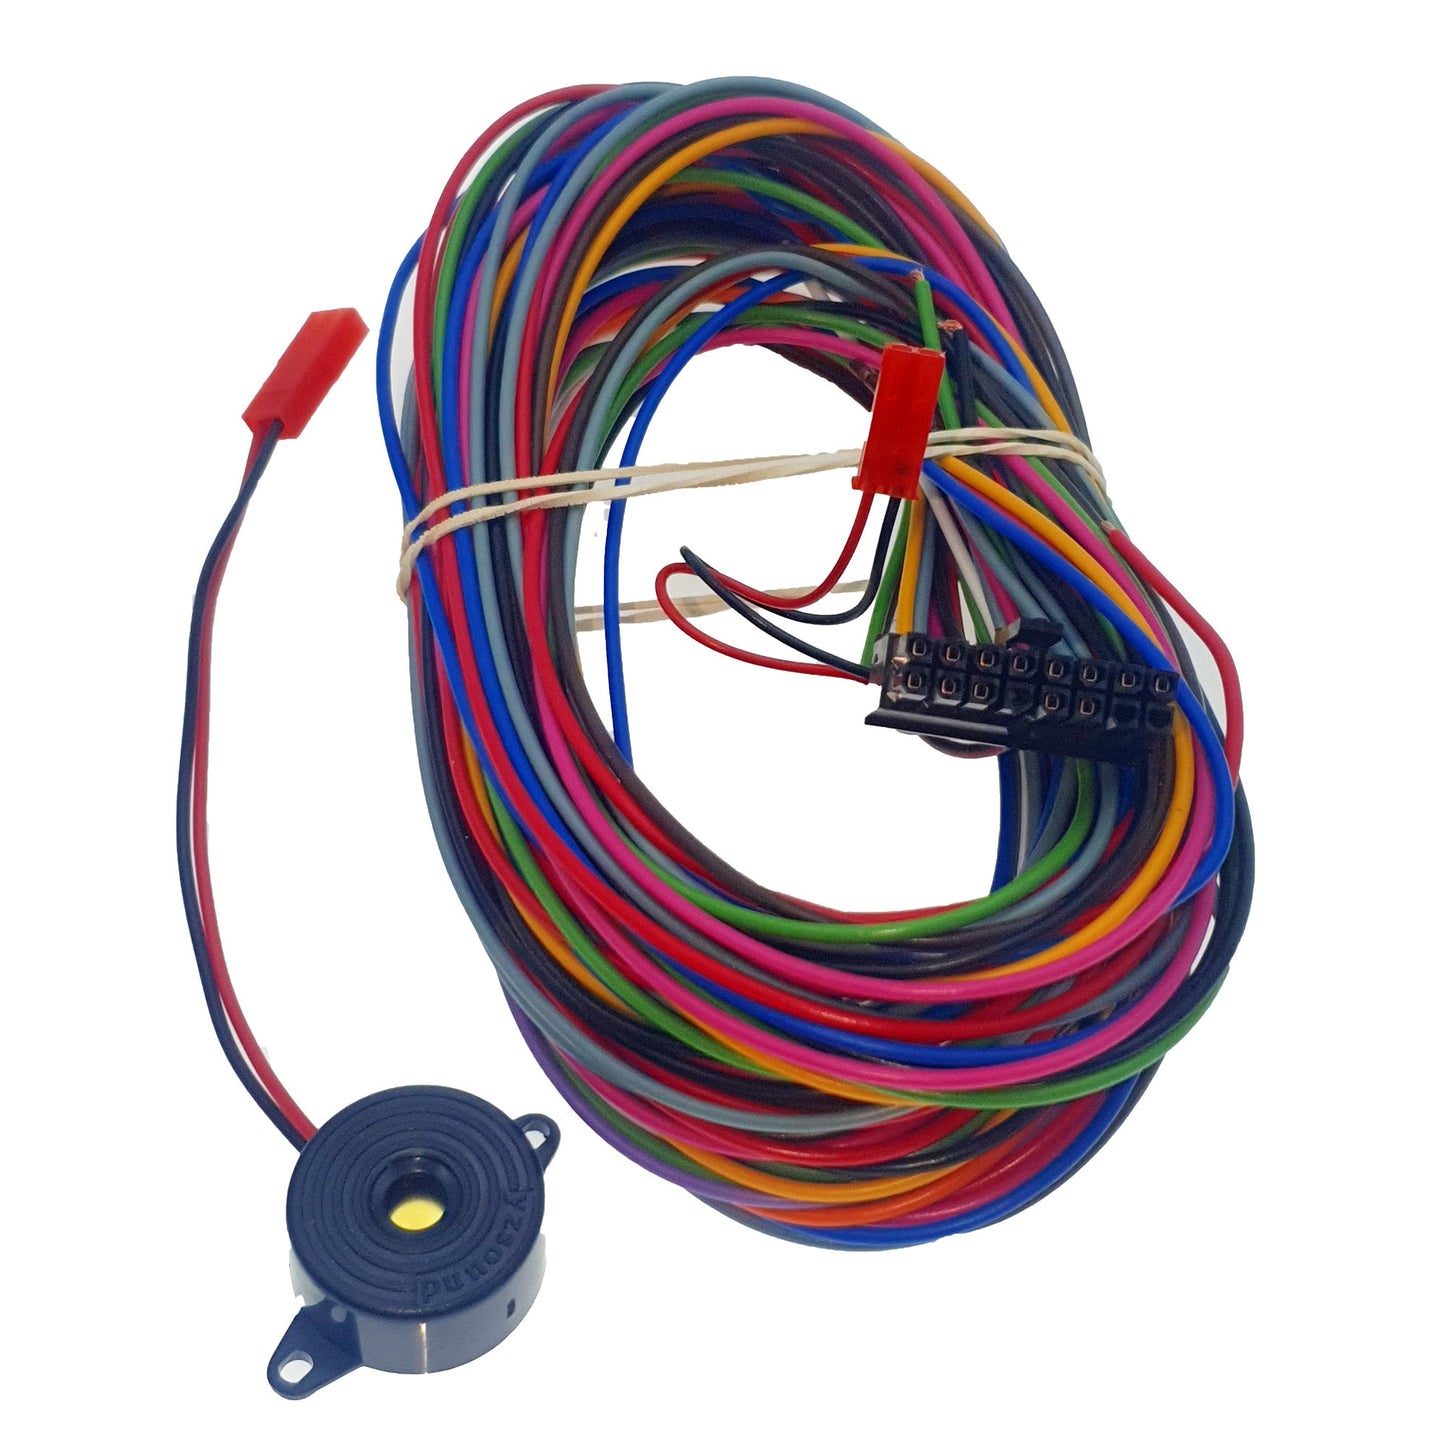 This is the standard EMS3 wiring harness that ships with the EMS3 unit. It includes the external buzzer and Data logging / programming wires.